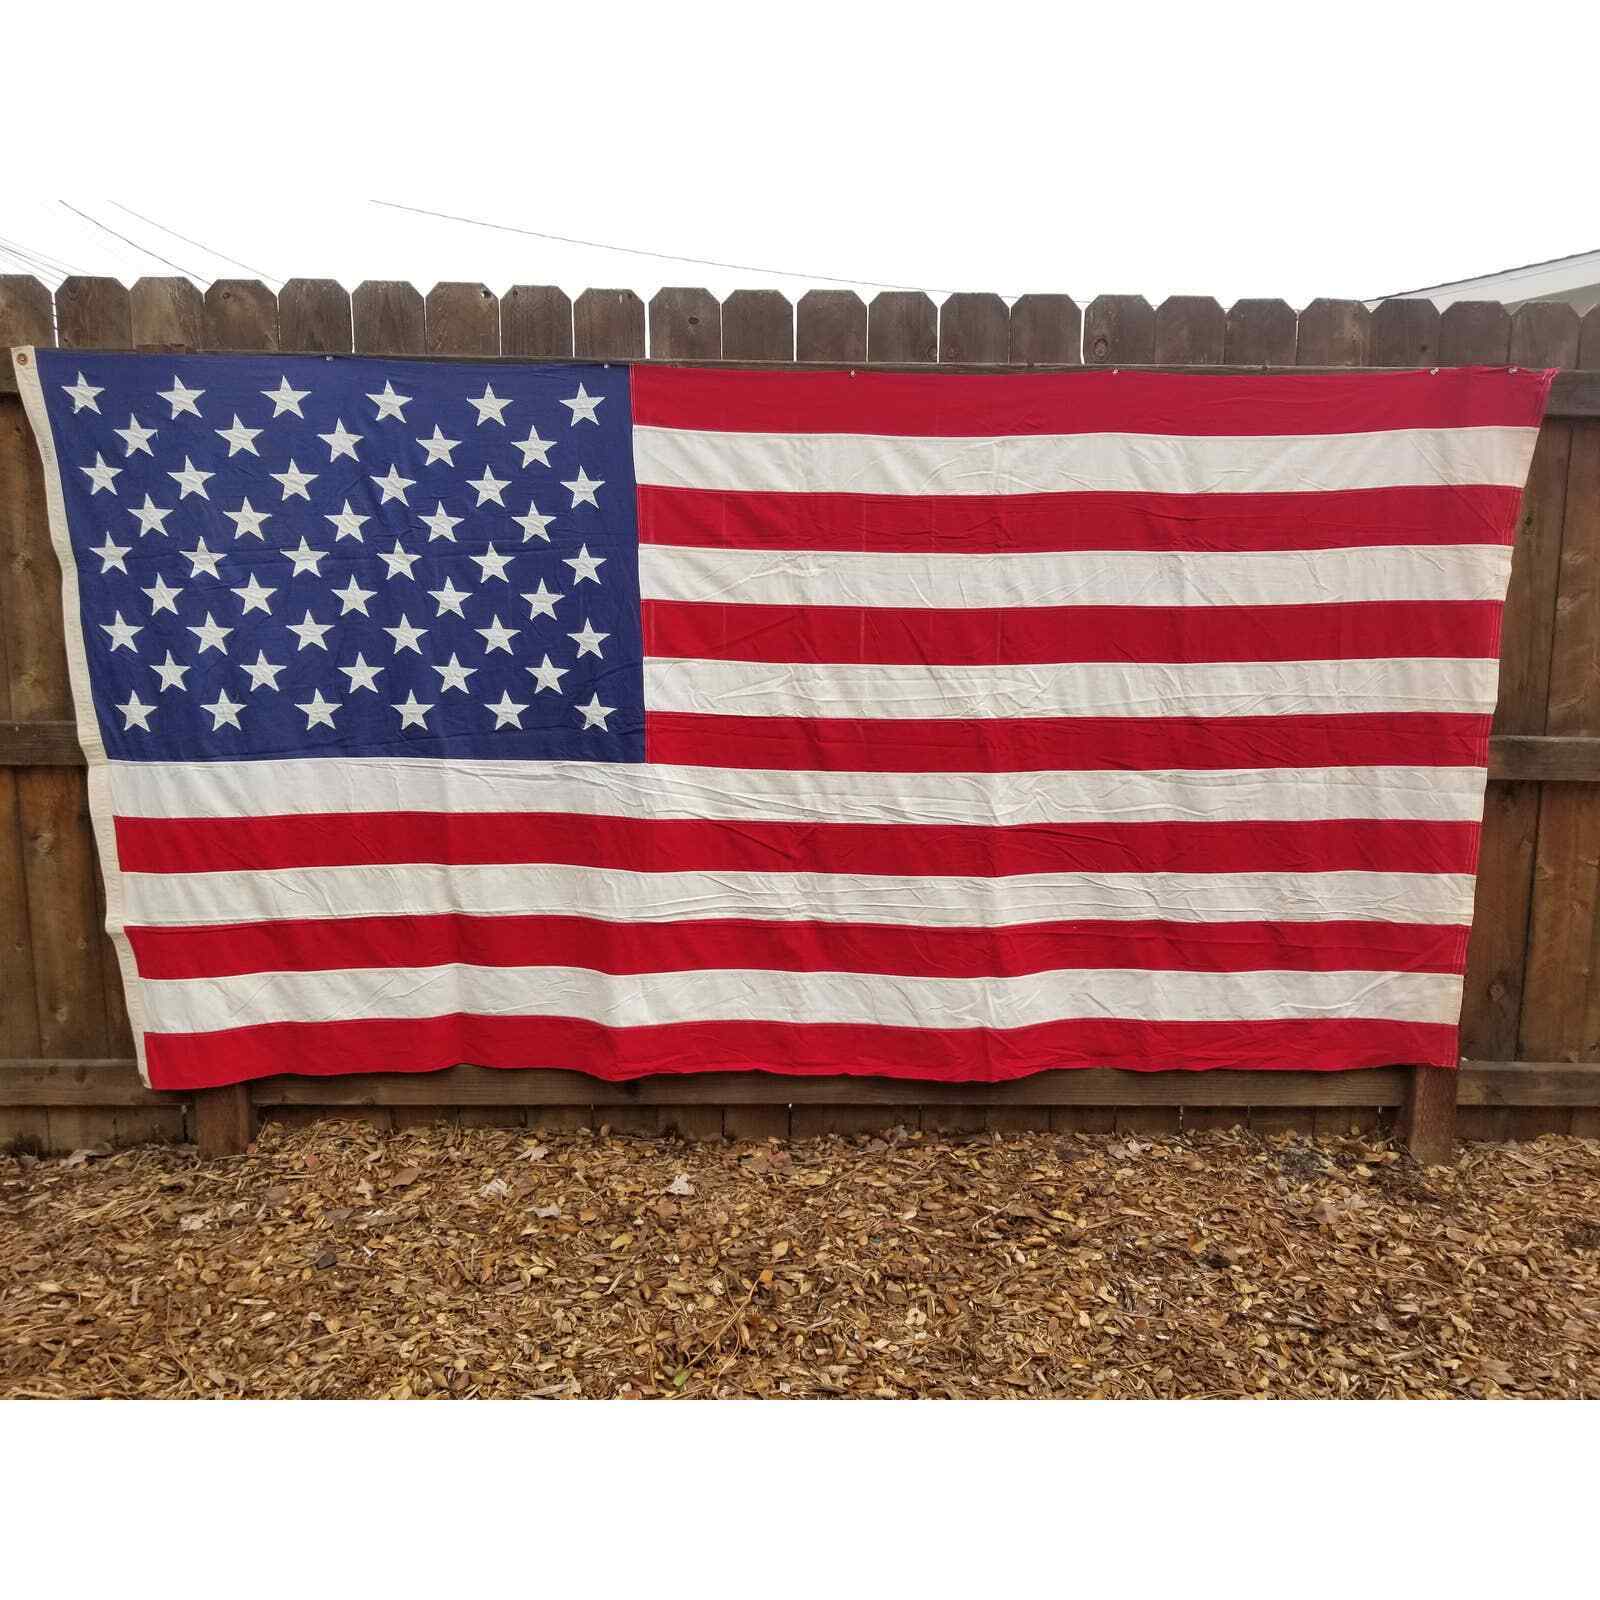 Huge American Flag by Valley Forge Cotton Flag Co 5\' x 9\' * 50 Stitched Stars